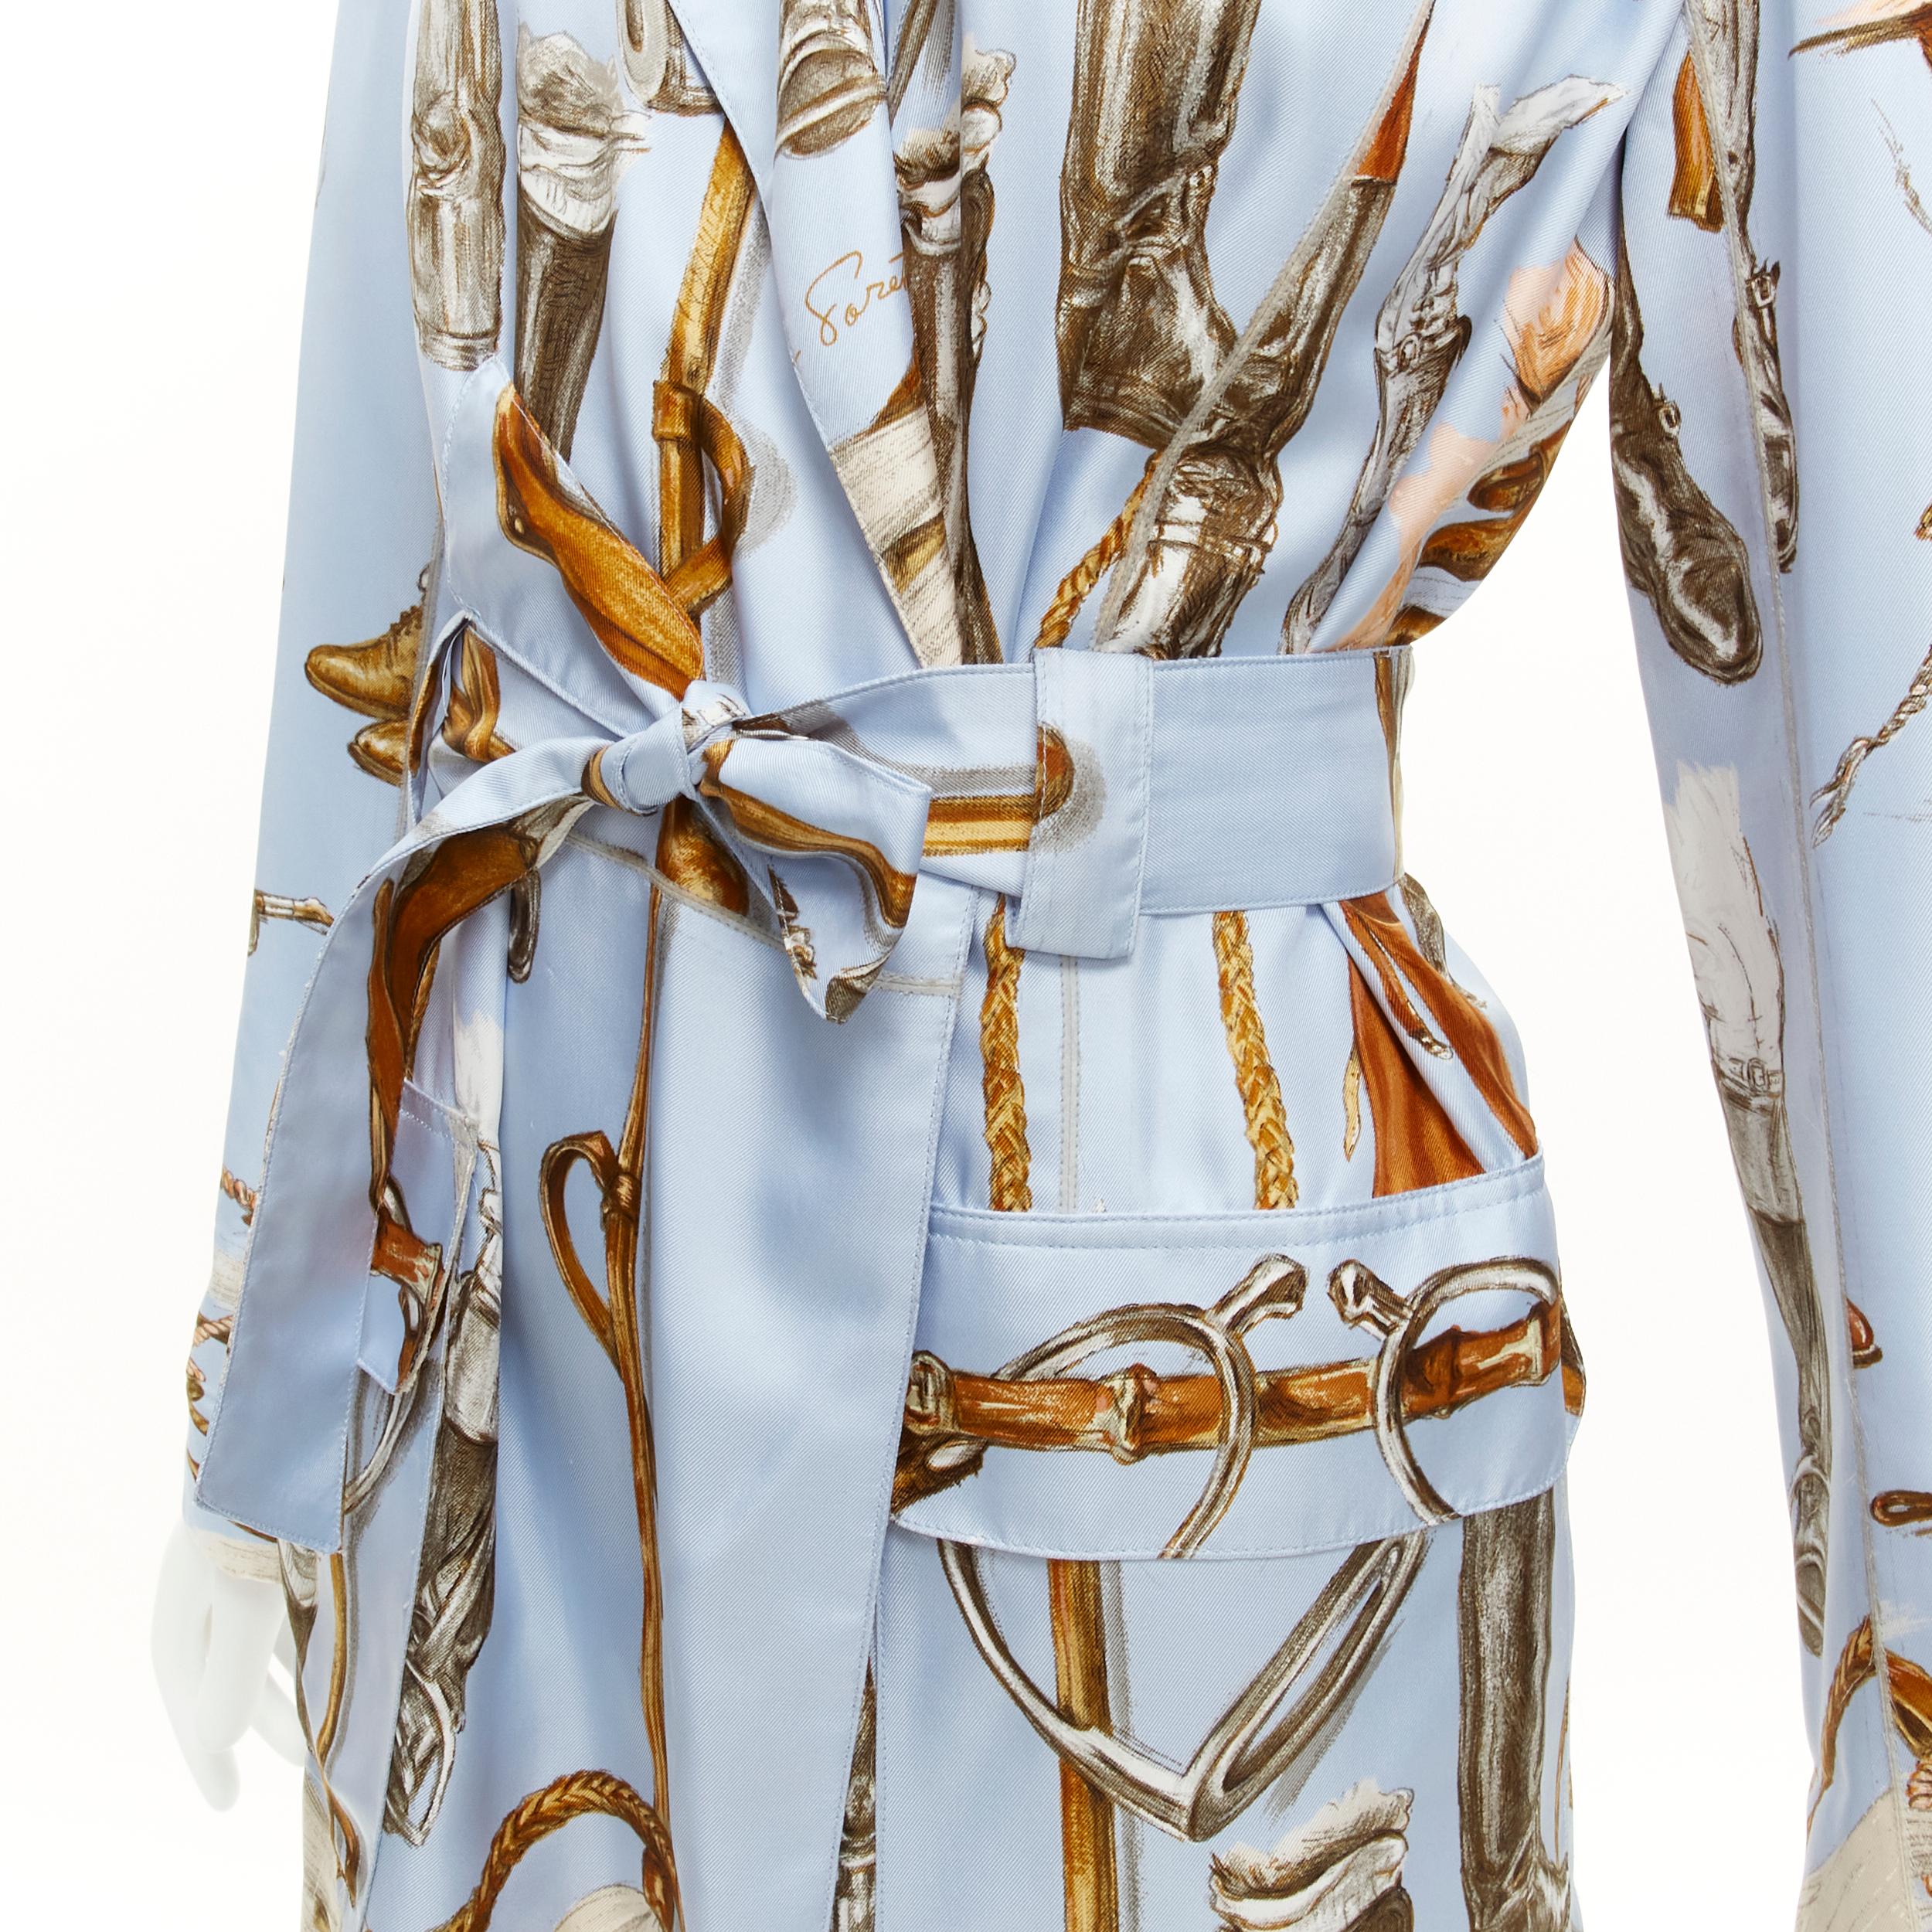 HERMES 100% silk light blue Equestrian boot hat print belted robe jacket FR40 L
Reference: TGAS/D00056
Brand: Hermes
Material: Silk
Color: Blue, Brown
Pattern: Photographic Print
Closure: Belt
Lining: Blue Fabric
Made in: